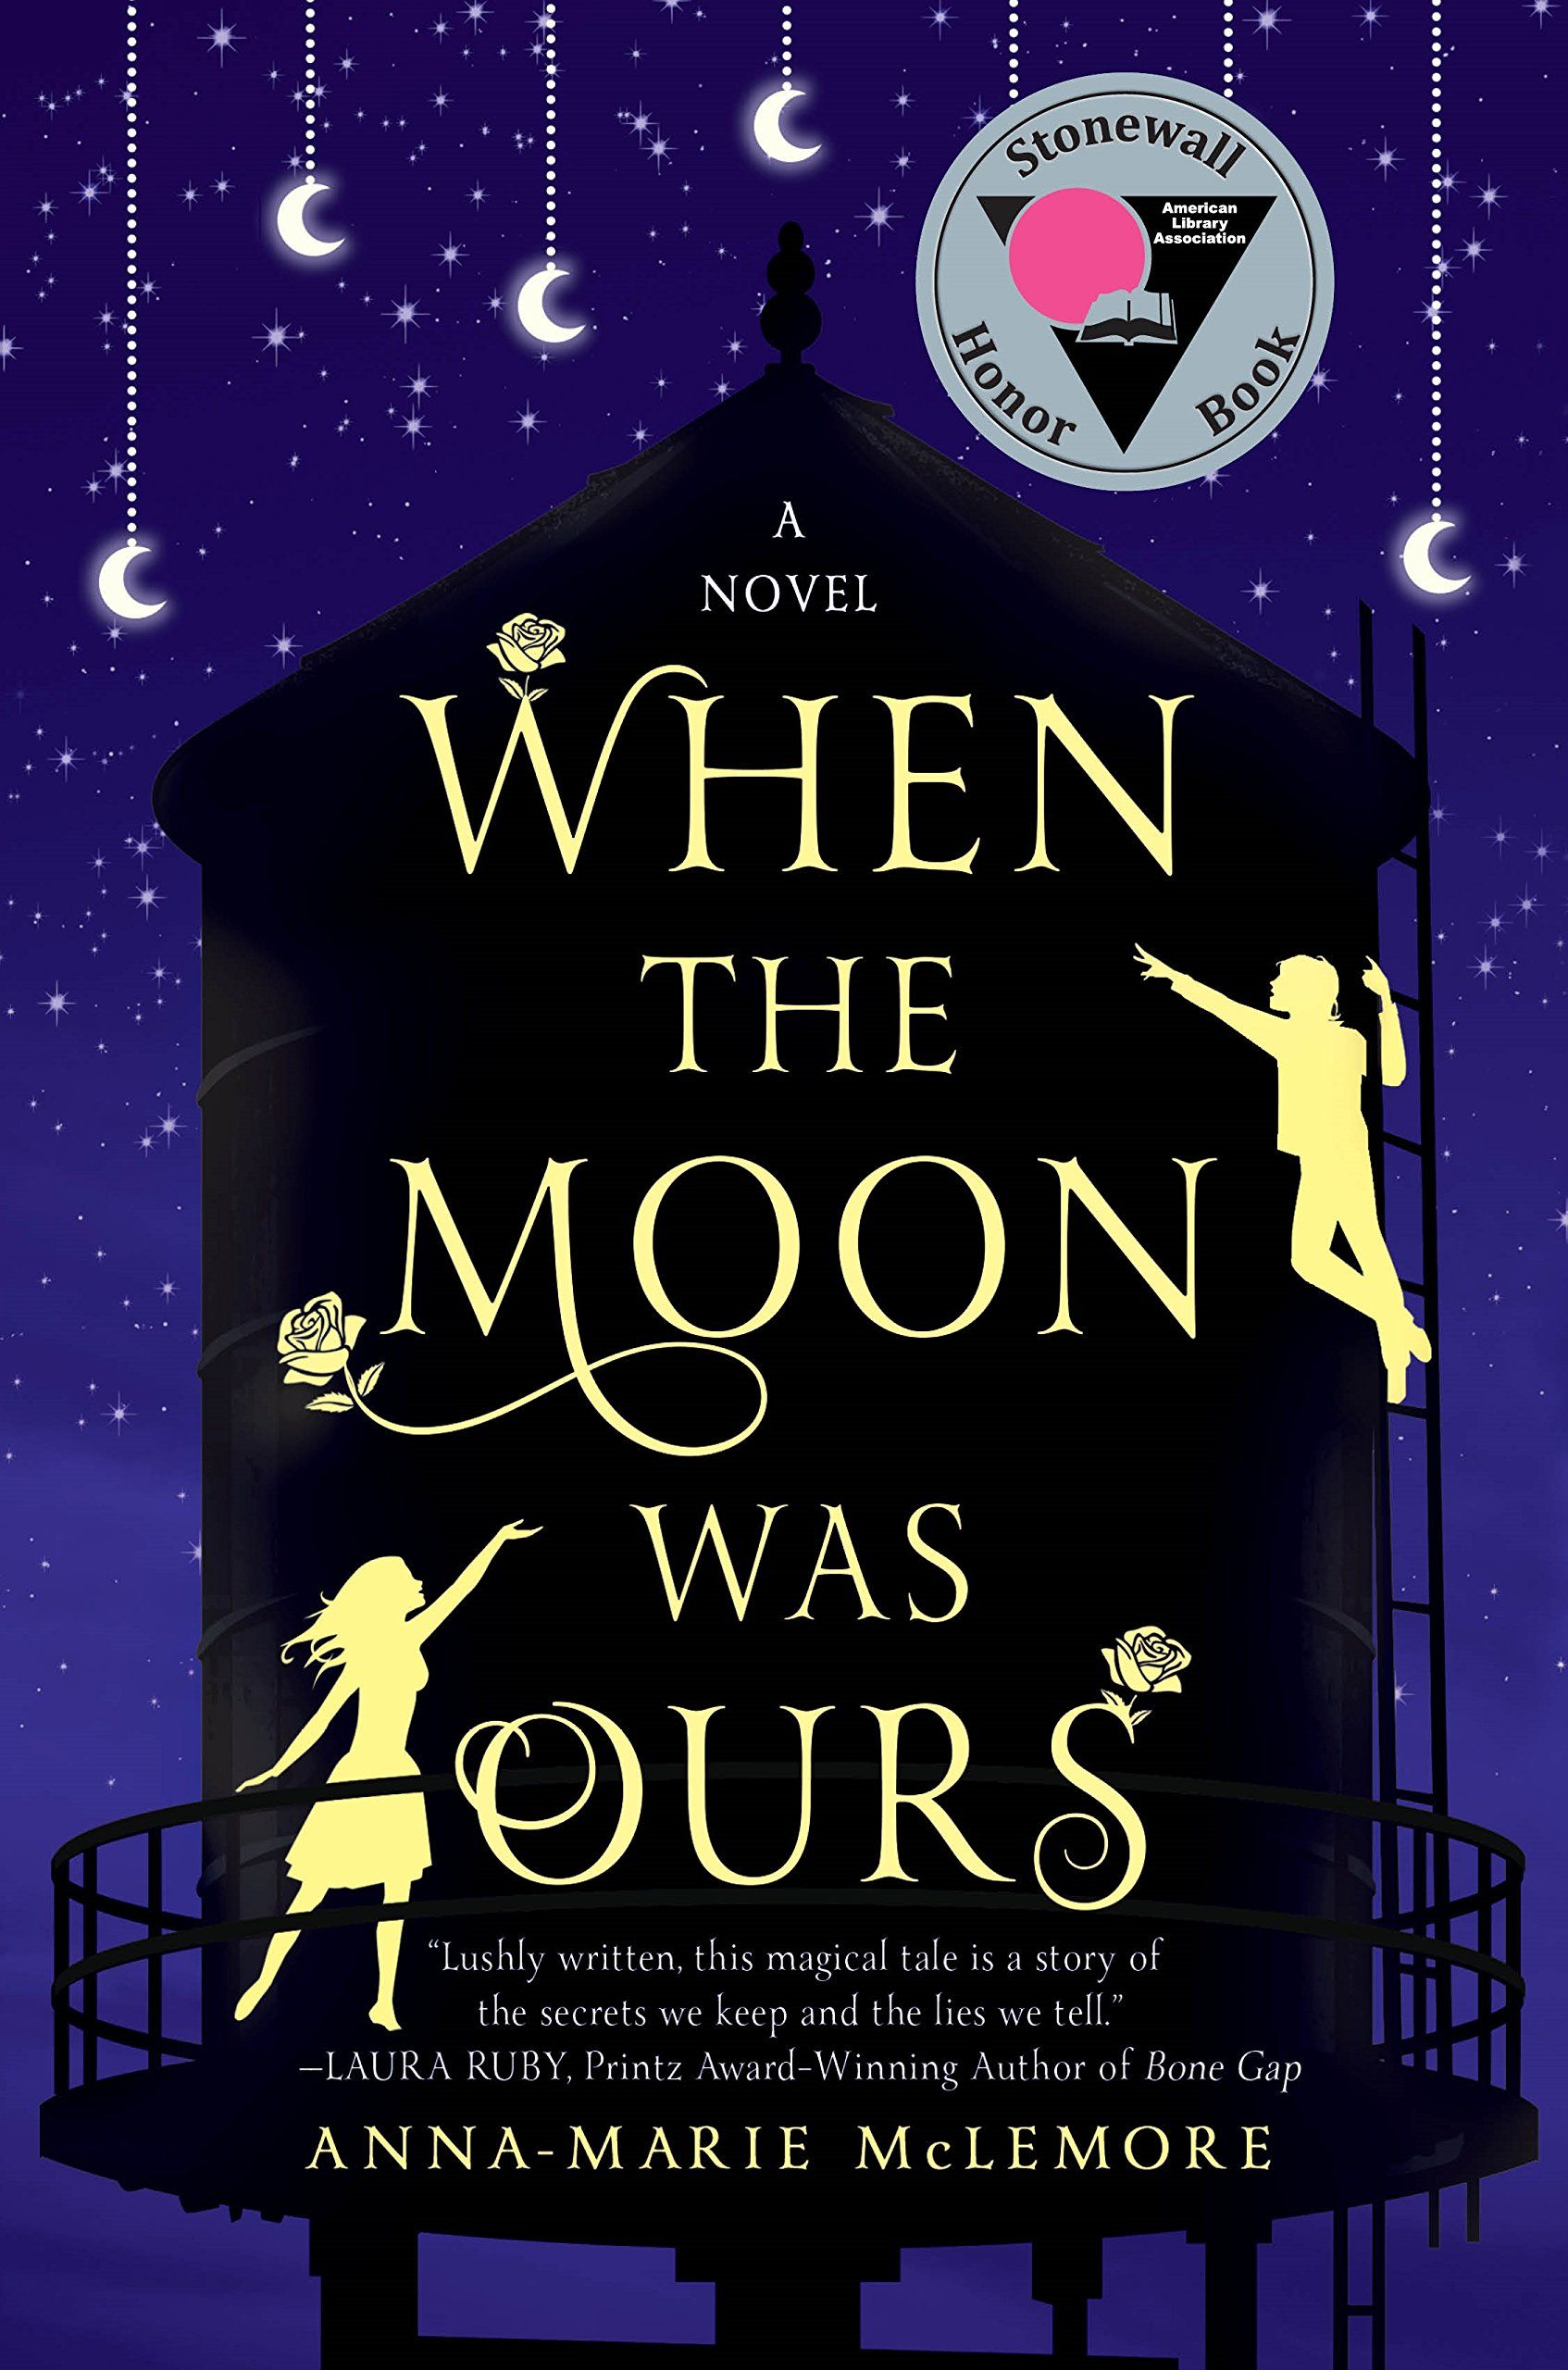 The cover of the book When the Moon Was Ours